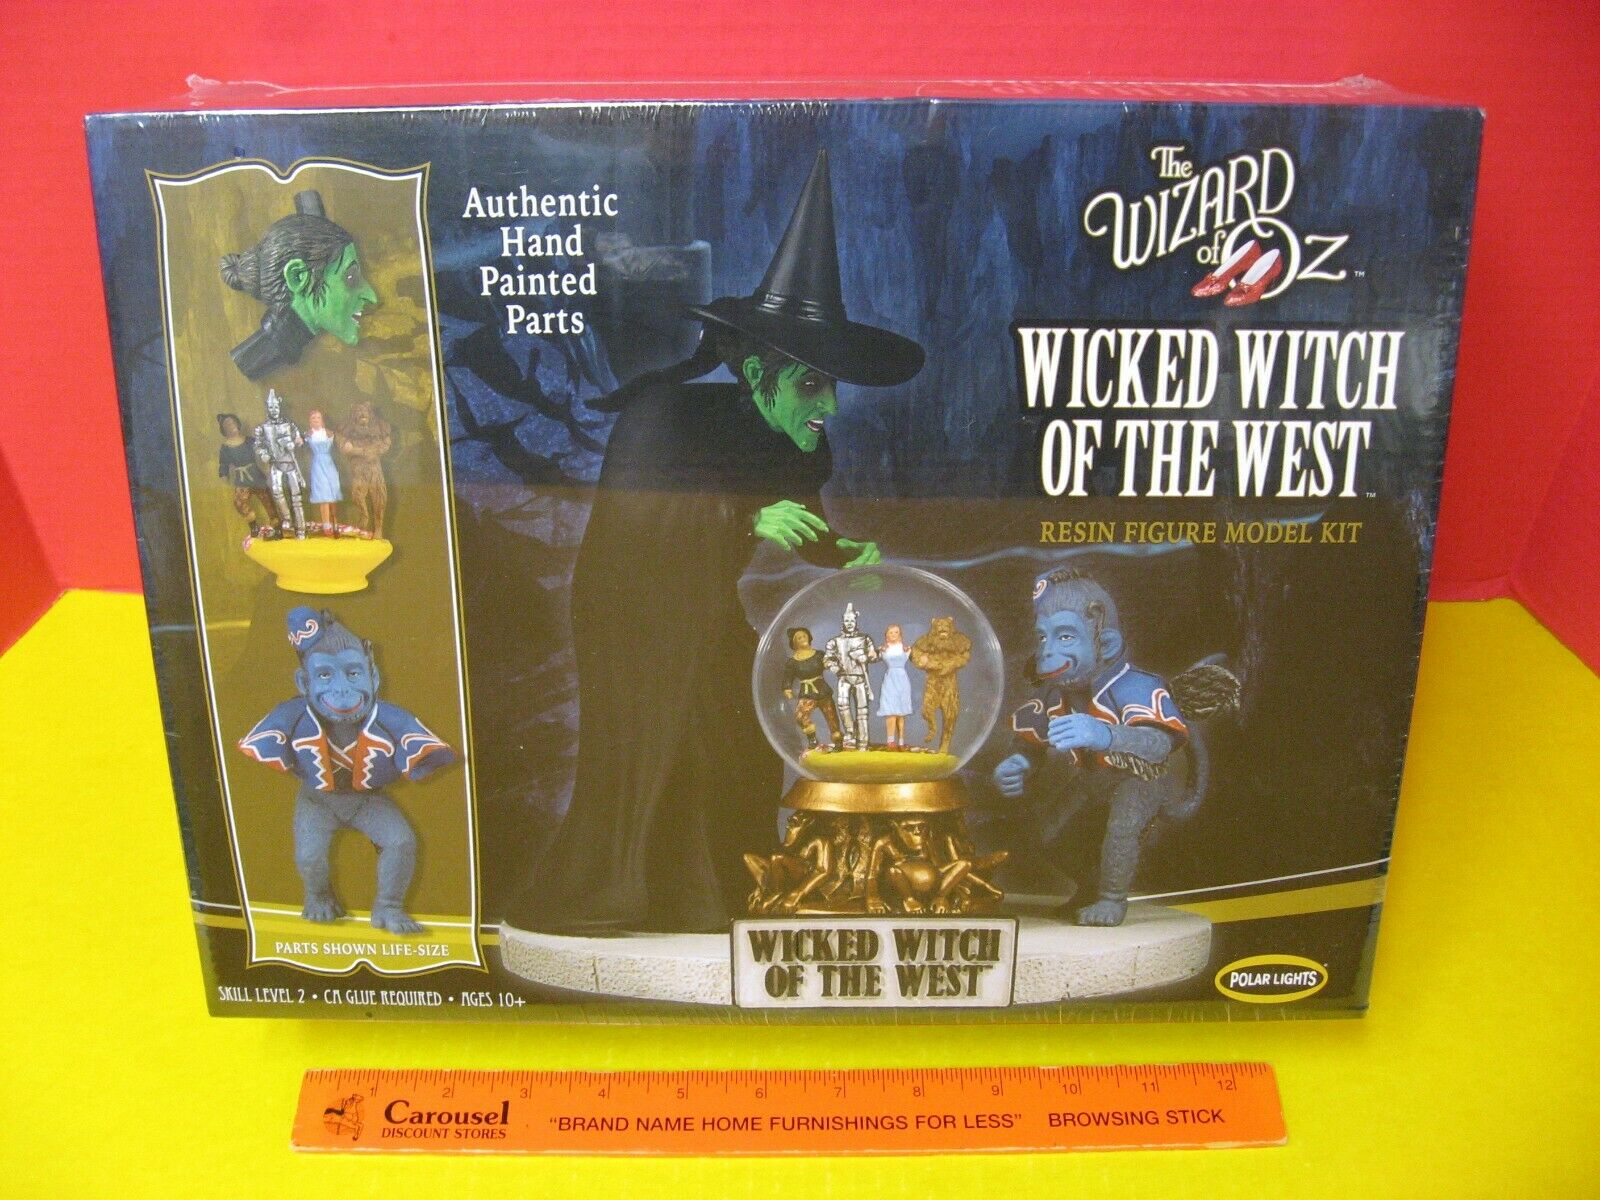 2015 POLAR LIGHTS / ROUND 2 RESIN / WIZARD OF OZ / WICKED WITCH OF THE WEST KIT